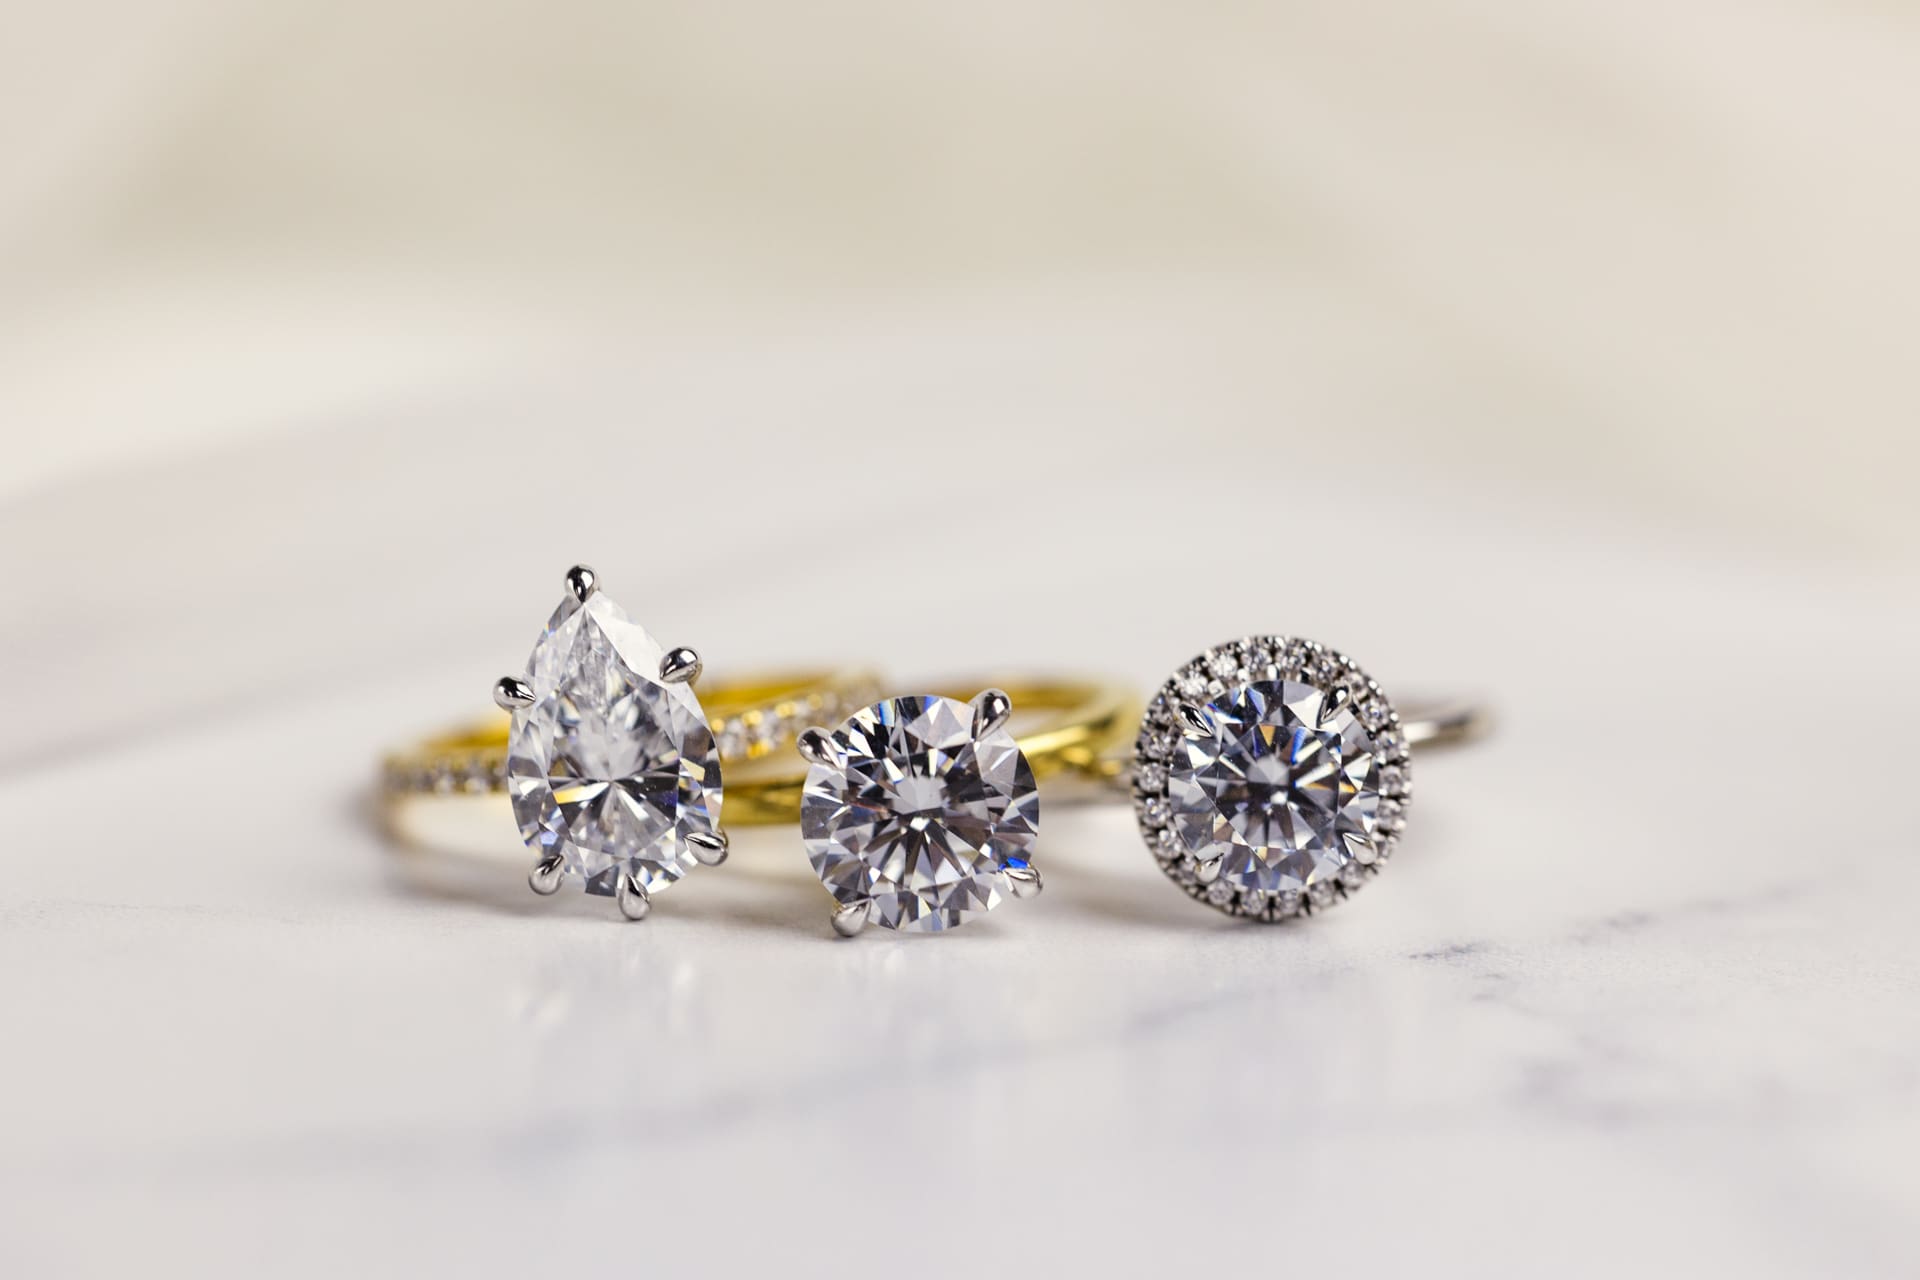 Detail photo of three diamond engagement rings on white marble counter at Chicago photography studio P&M Studio